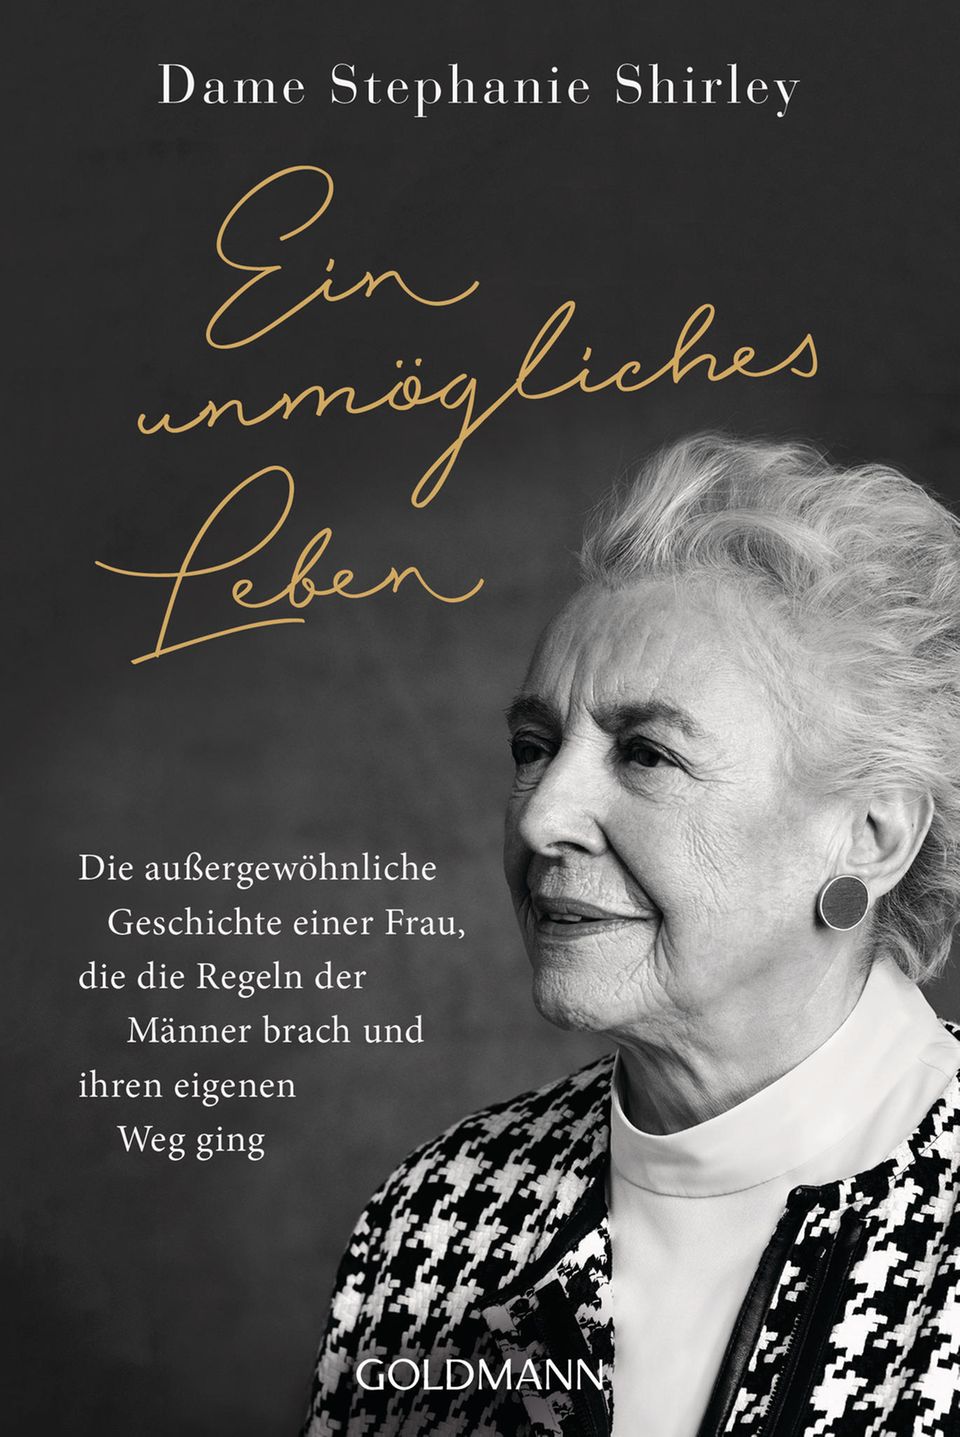 Cover of the book "An Impossible Life"